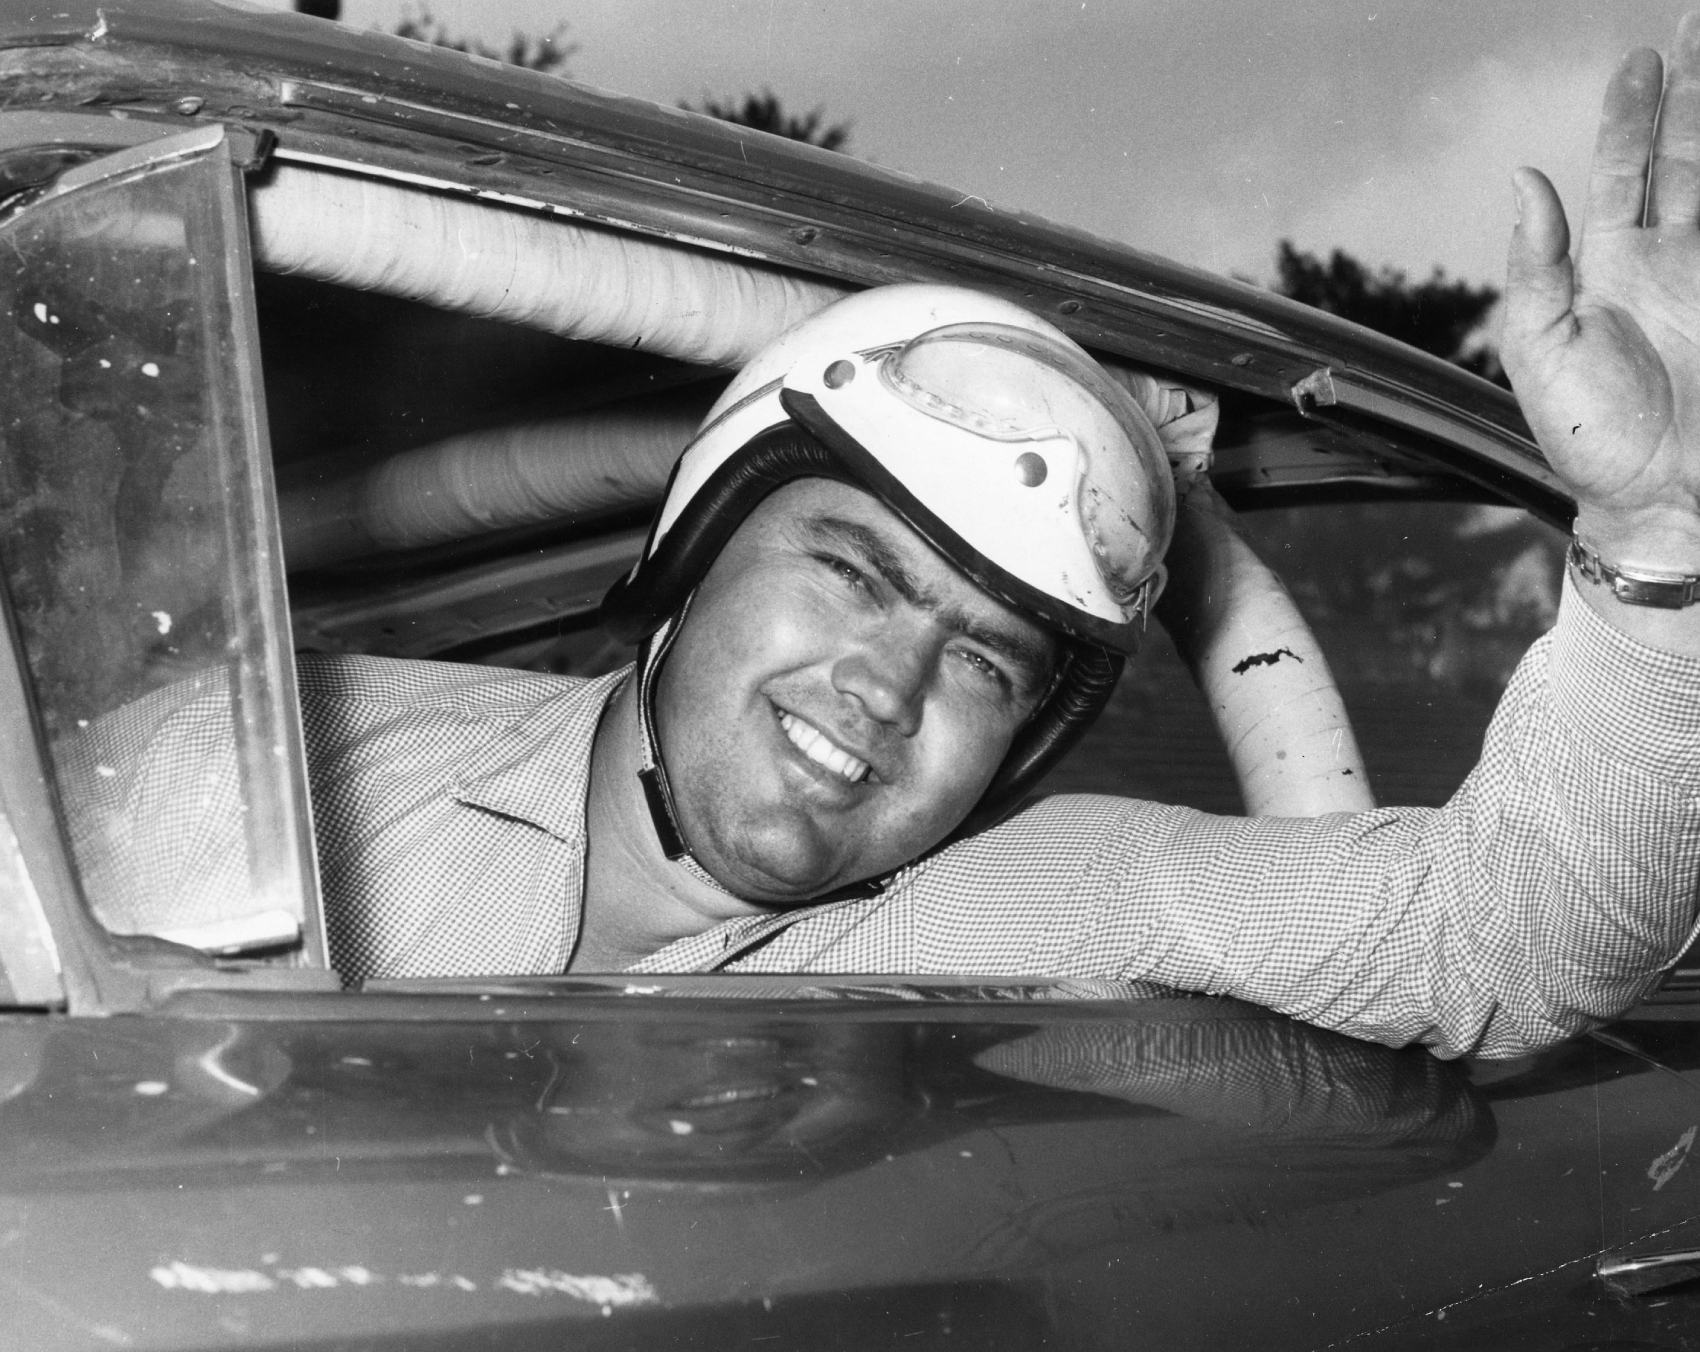 NASCAR legend Junior Johnson lived a pretty interesting life. He even went to prison for 'moonshining' and Ronald Reagan later pardoned him.